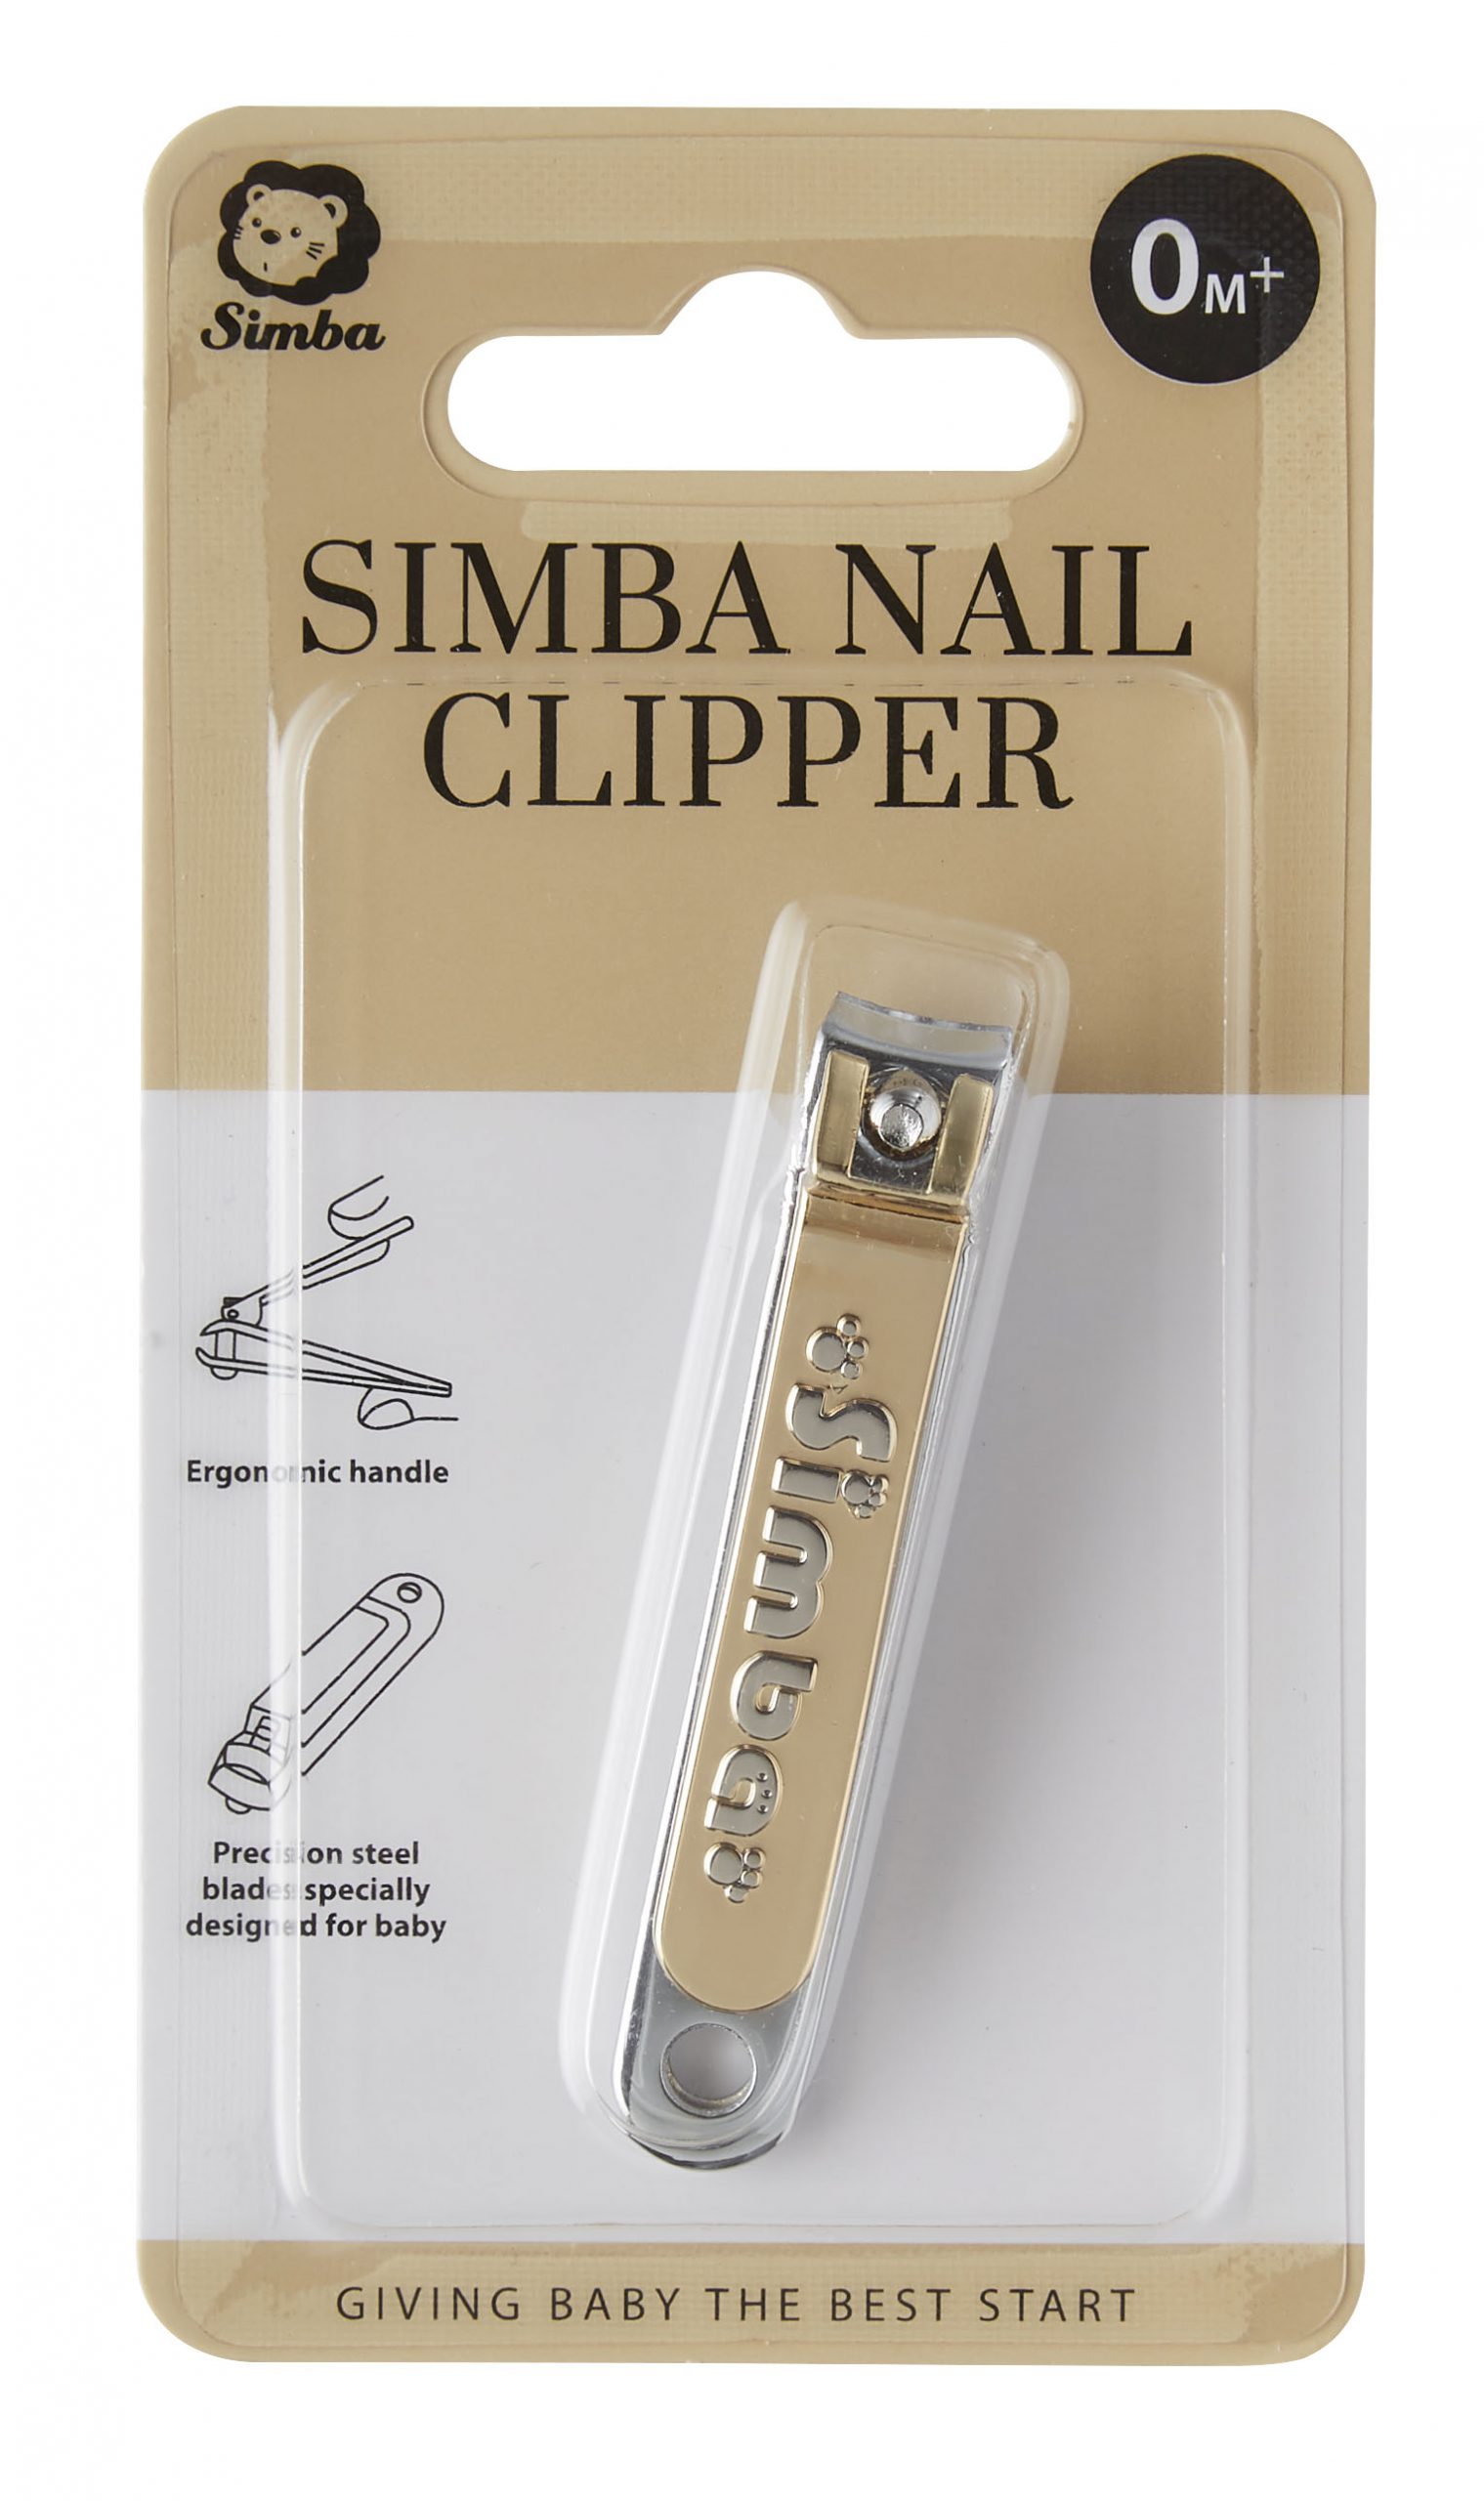 Baby Nail Clippers – the Bull and the Bee